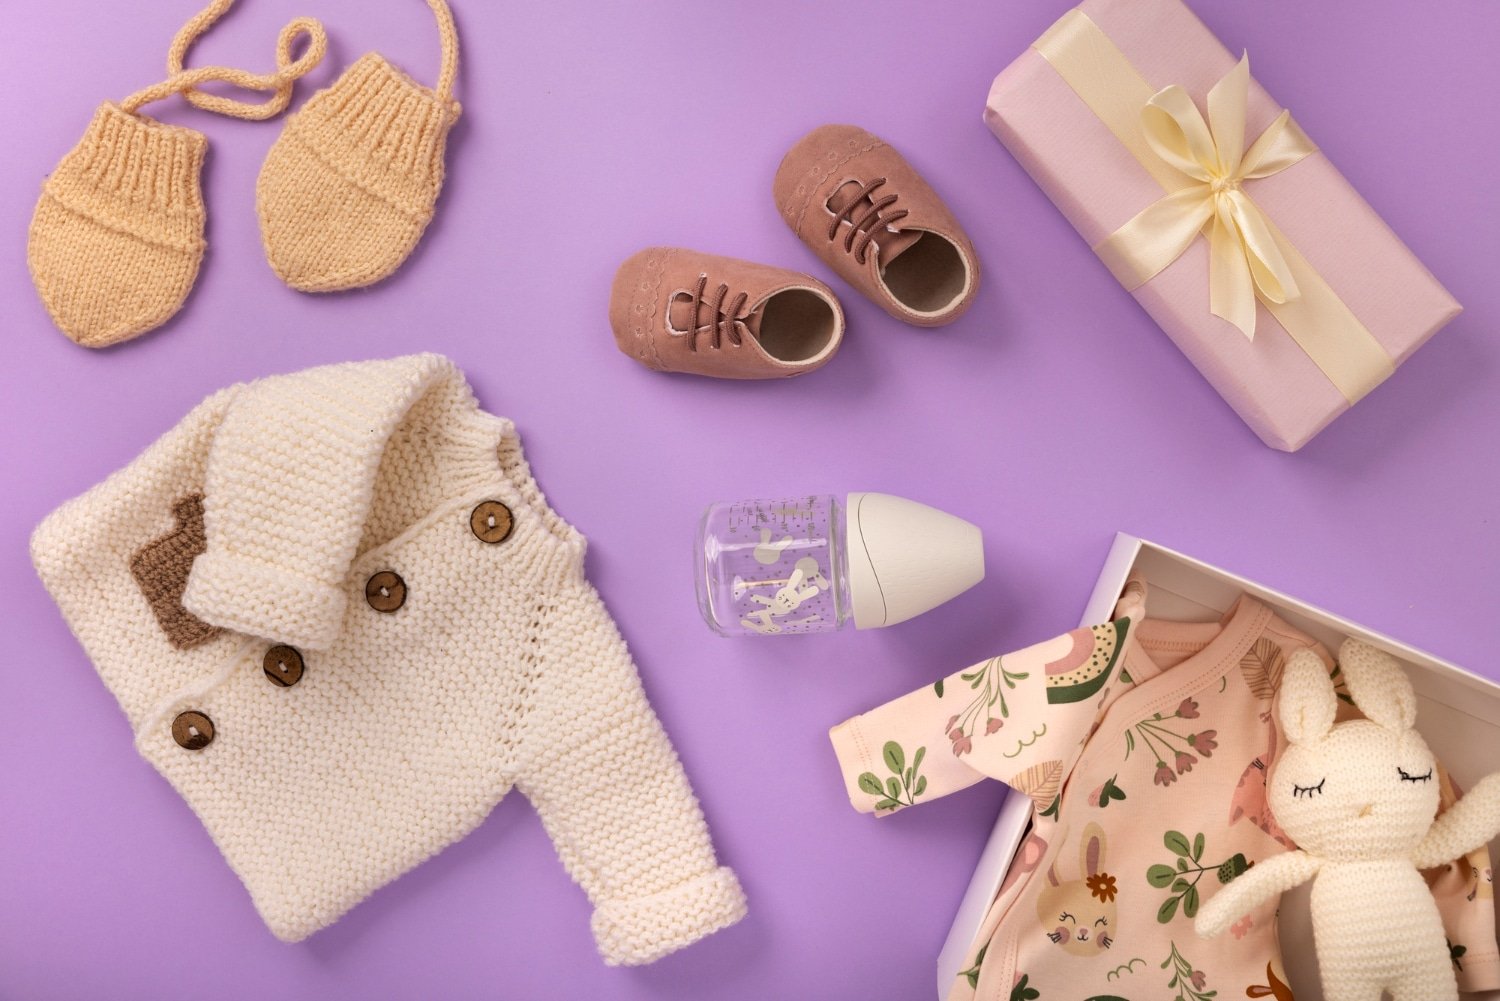 Gerber Childrenswear: Adorable Essentials for Your Little Ones